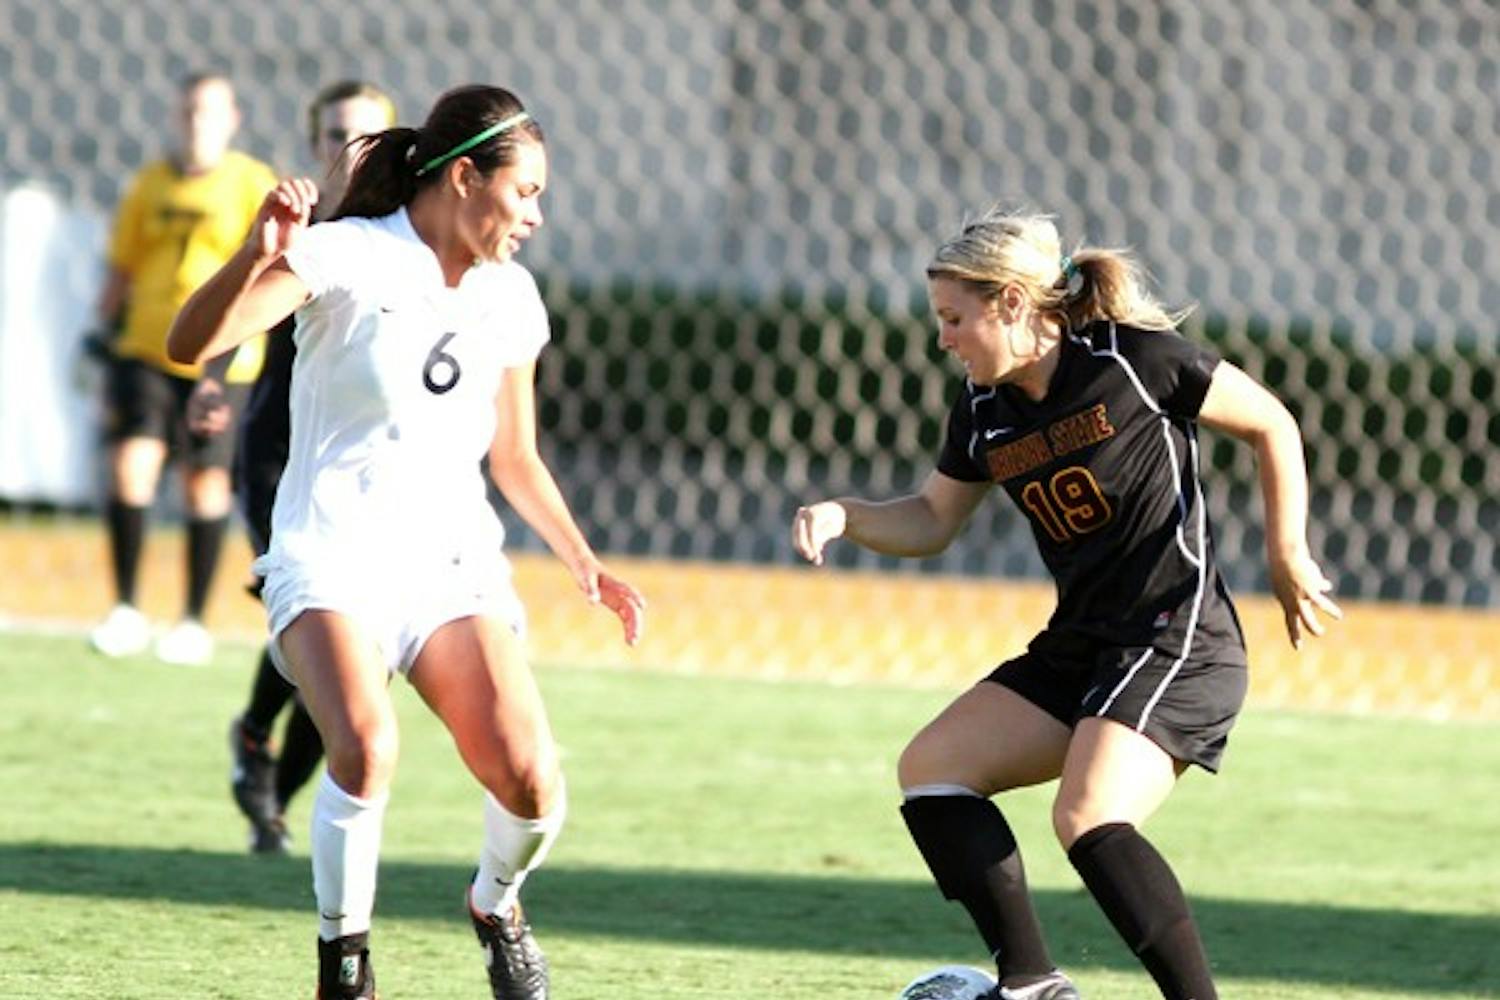 NOT ENOUGH: ASU senior defender Kari Shane tries to dribble past Cal sophomore midfielder Kaitlyn Fitzpatrick during the Golden Bears’ 1-0 win on Friday. The Sun Devils’ shortened roster was a major factor in the loss. (Photo courtesy of Steve Rodriguez)